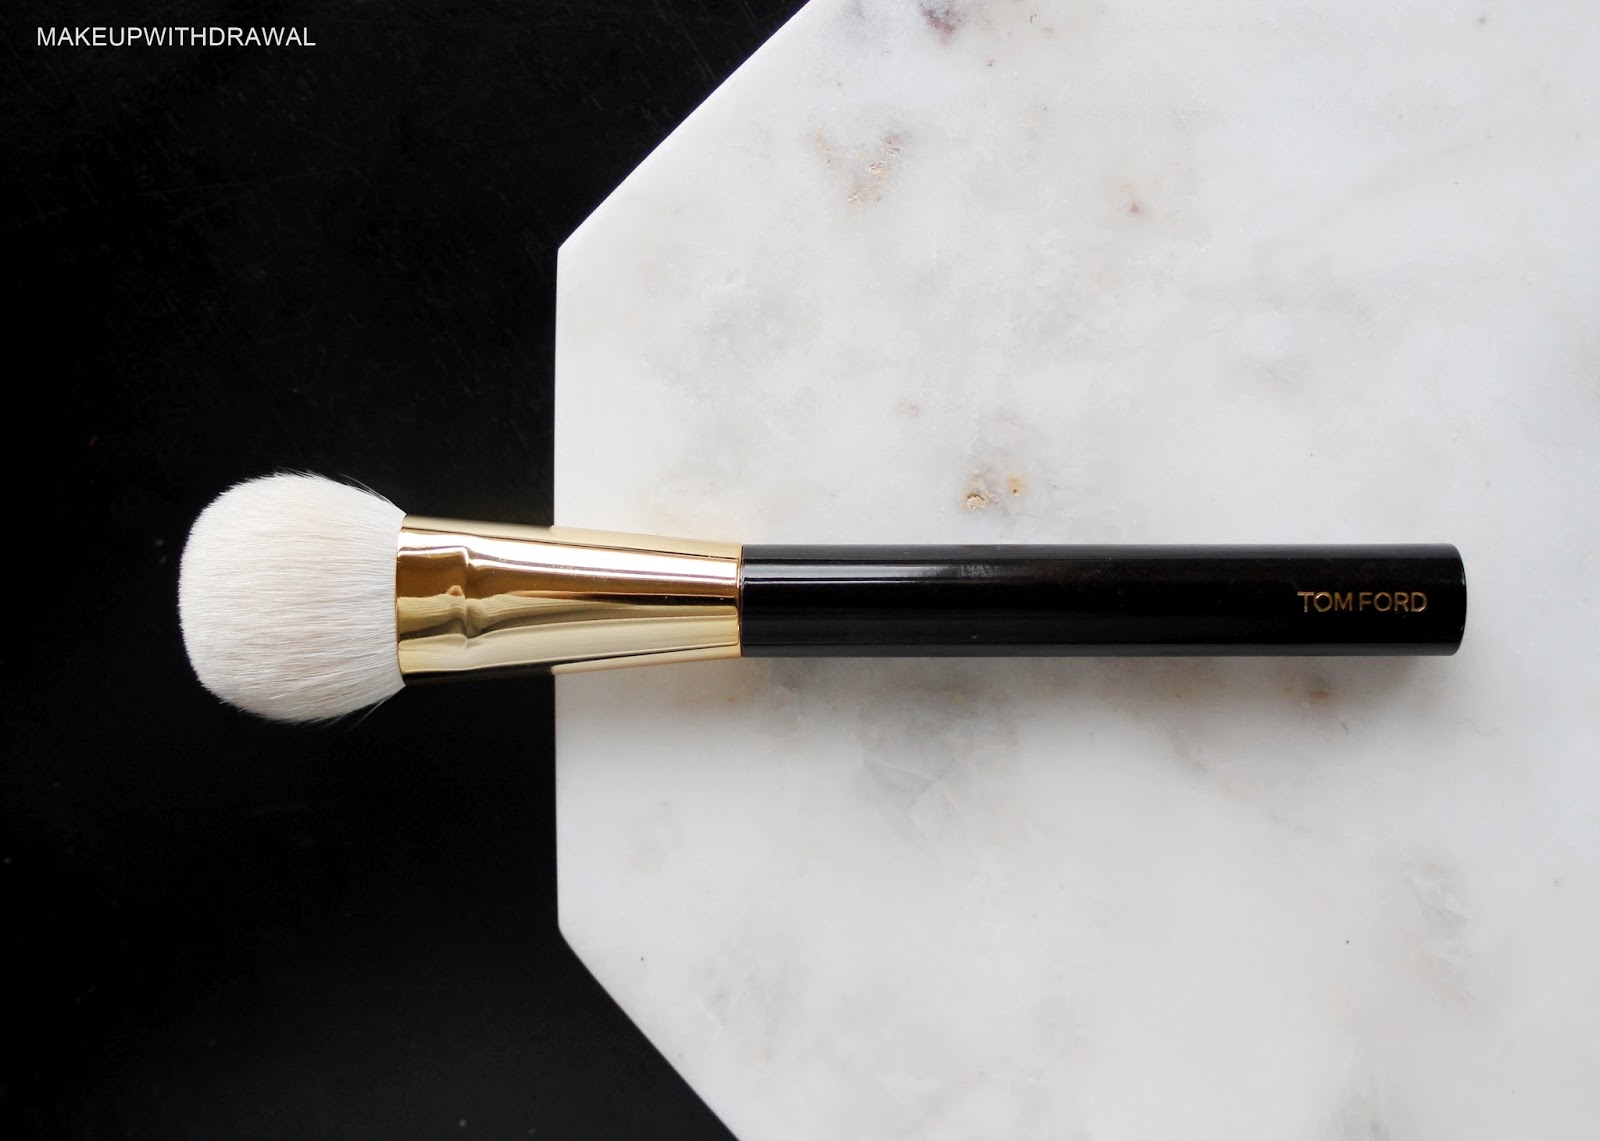 Shopping day and first impressions: Chanel Diapason, Mac It's Physical and  La Mer Concealer – Sweet Makeup Temptations